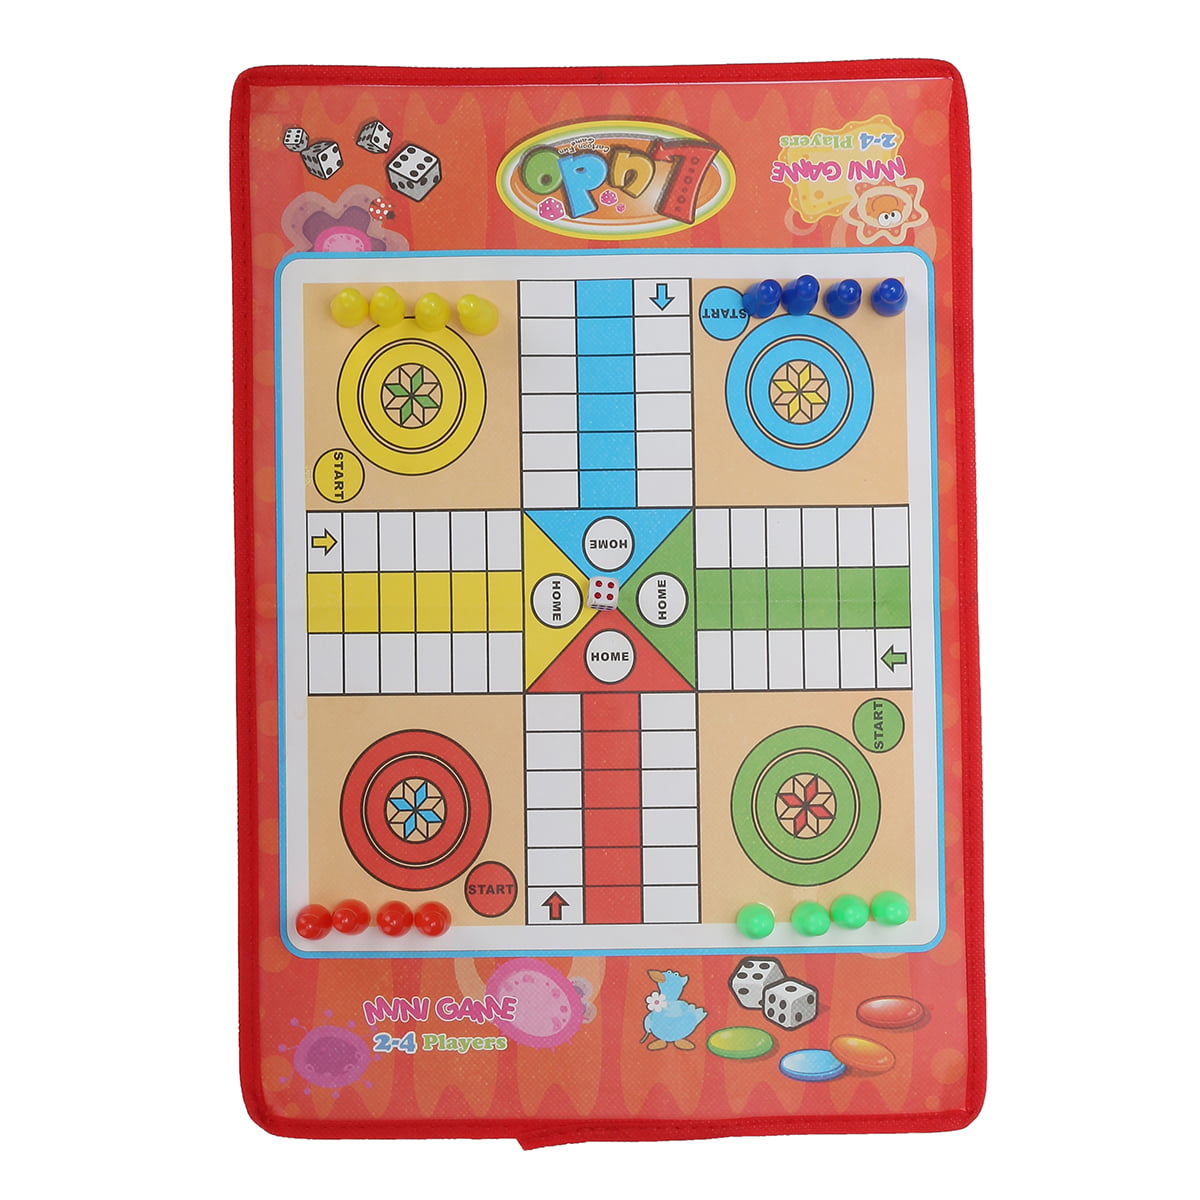 Giant Snakes and Ladders Floor Board Traditional Family Game 